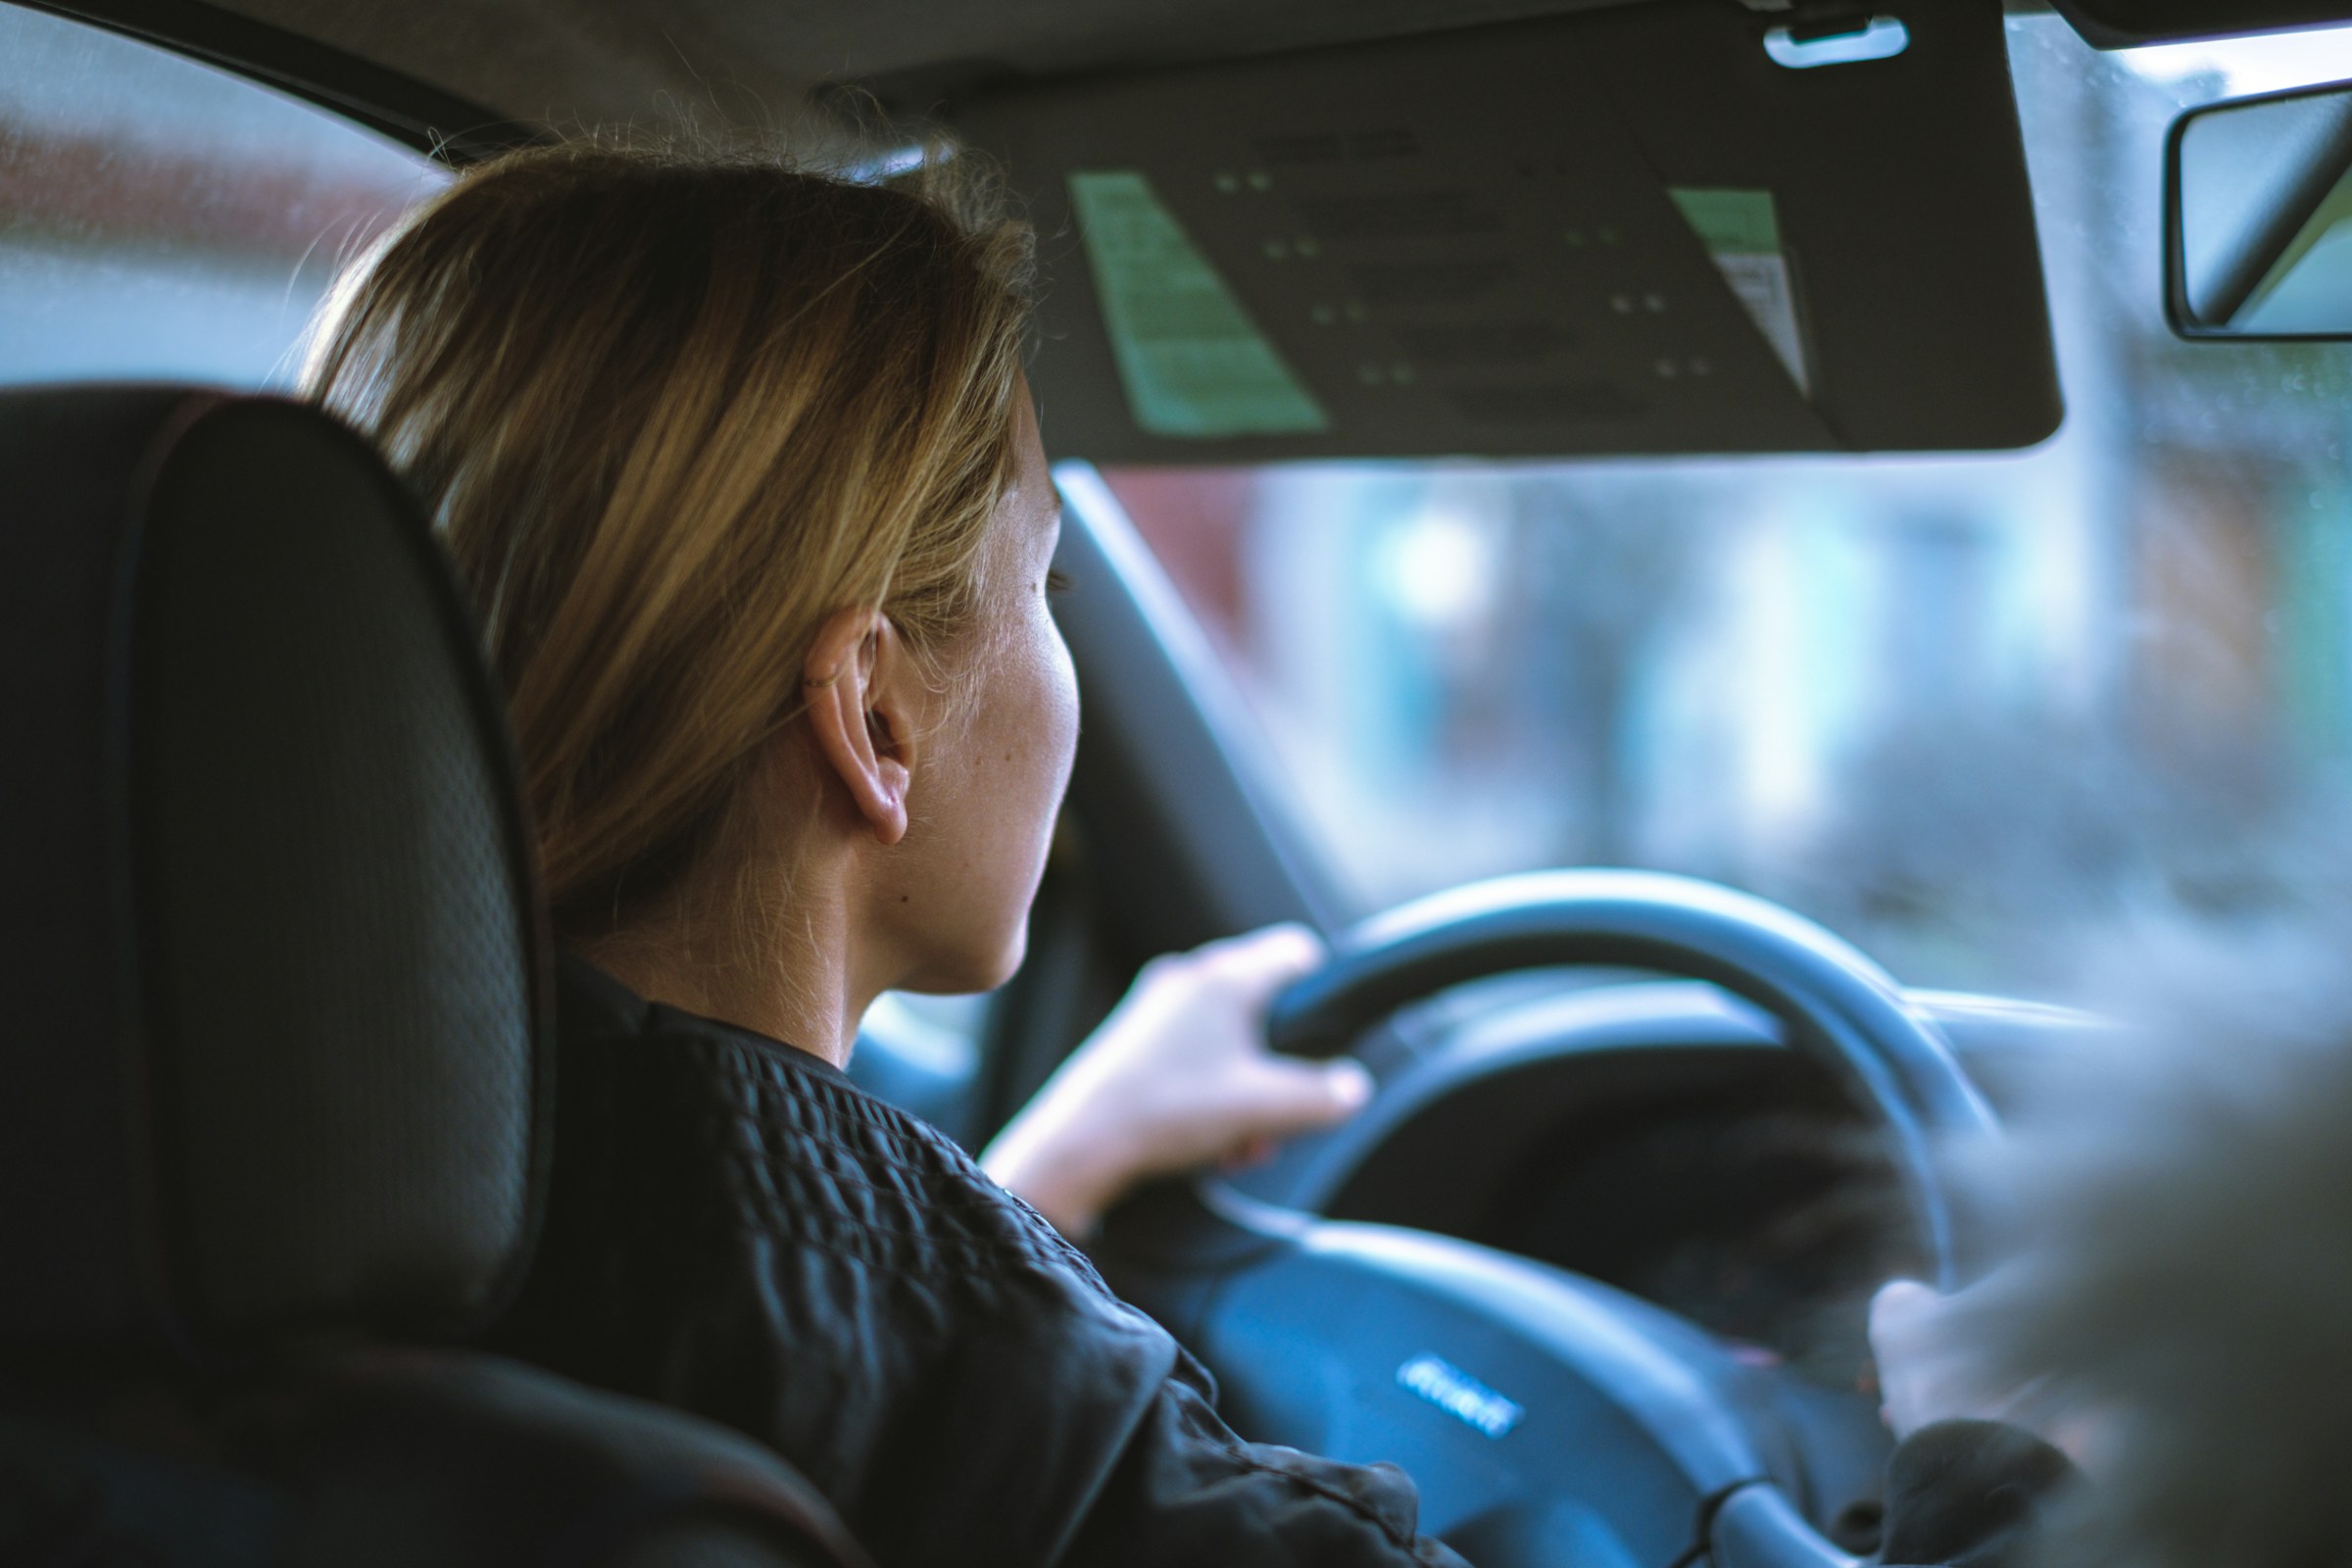 A woman trying to focus while driving | Source: Unsplash